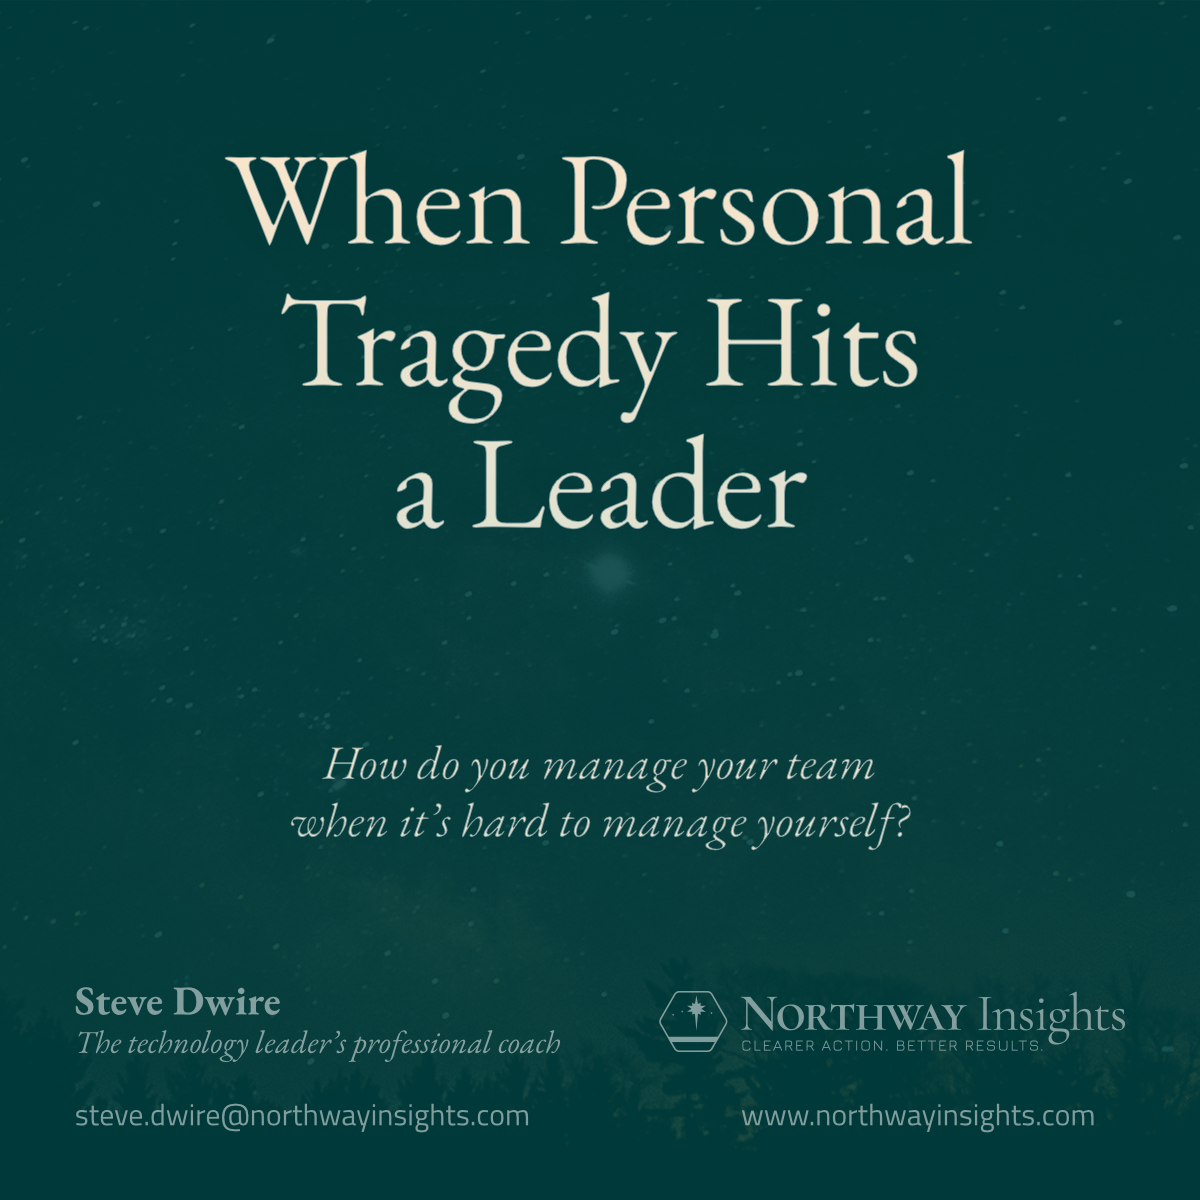 When Personal Tragedy Hits a Leader (How do you manage your team when it's hard to manage yourself?)